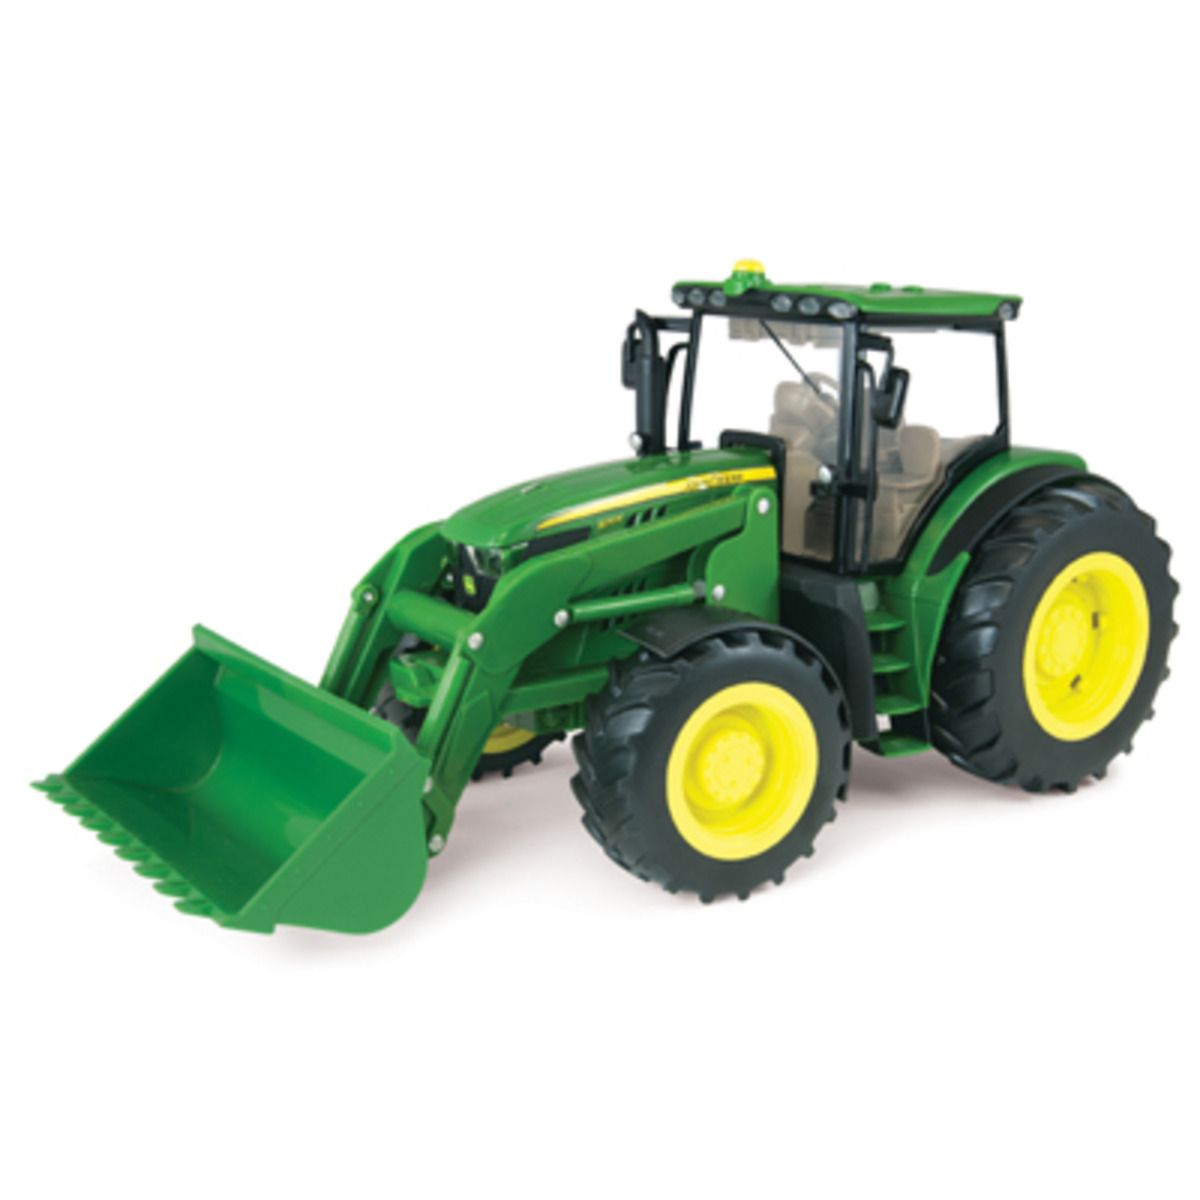 BIG FARM 6210R TRACTOR WITH LOADER (1/16 SCALE)